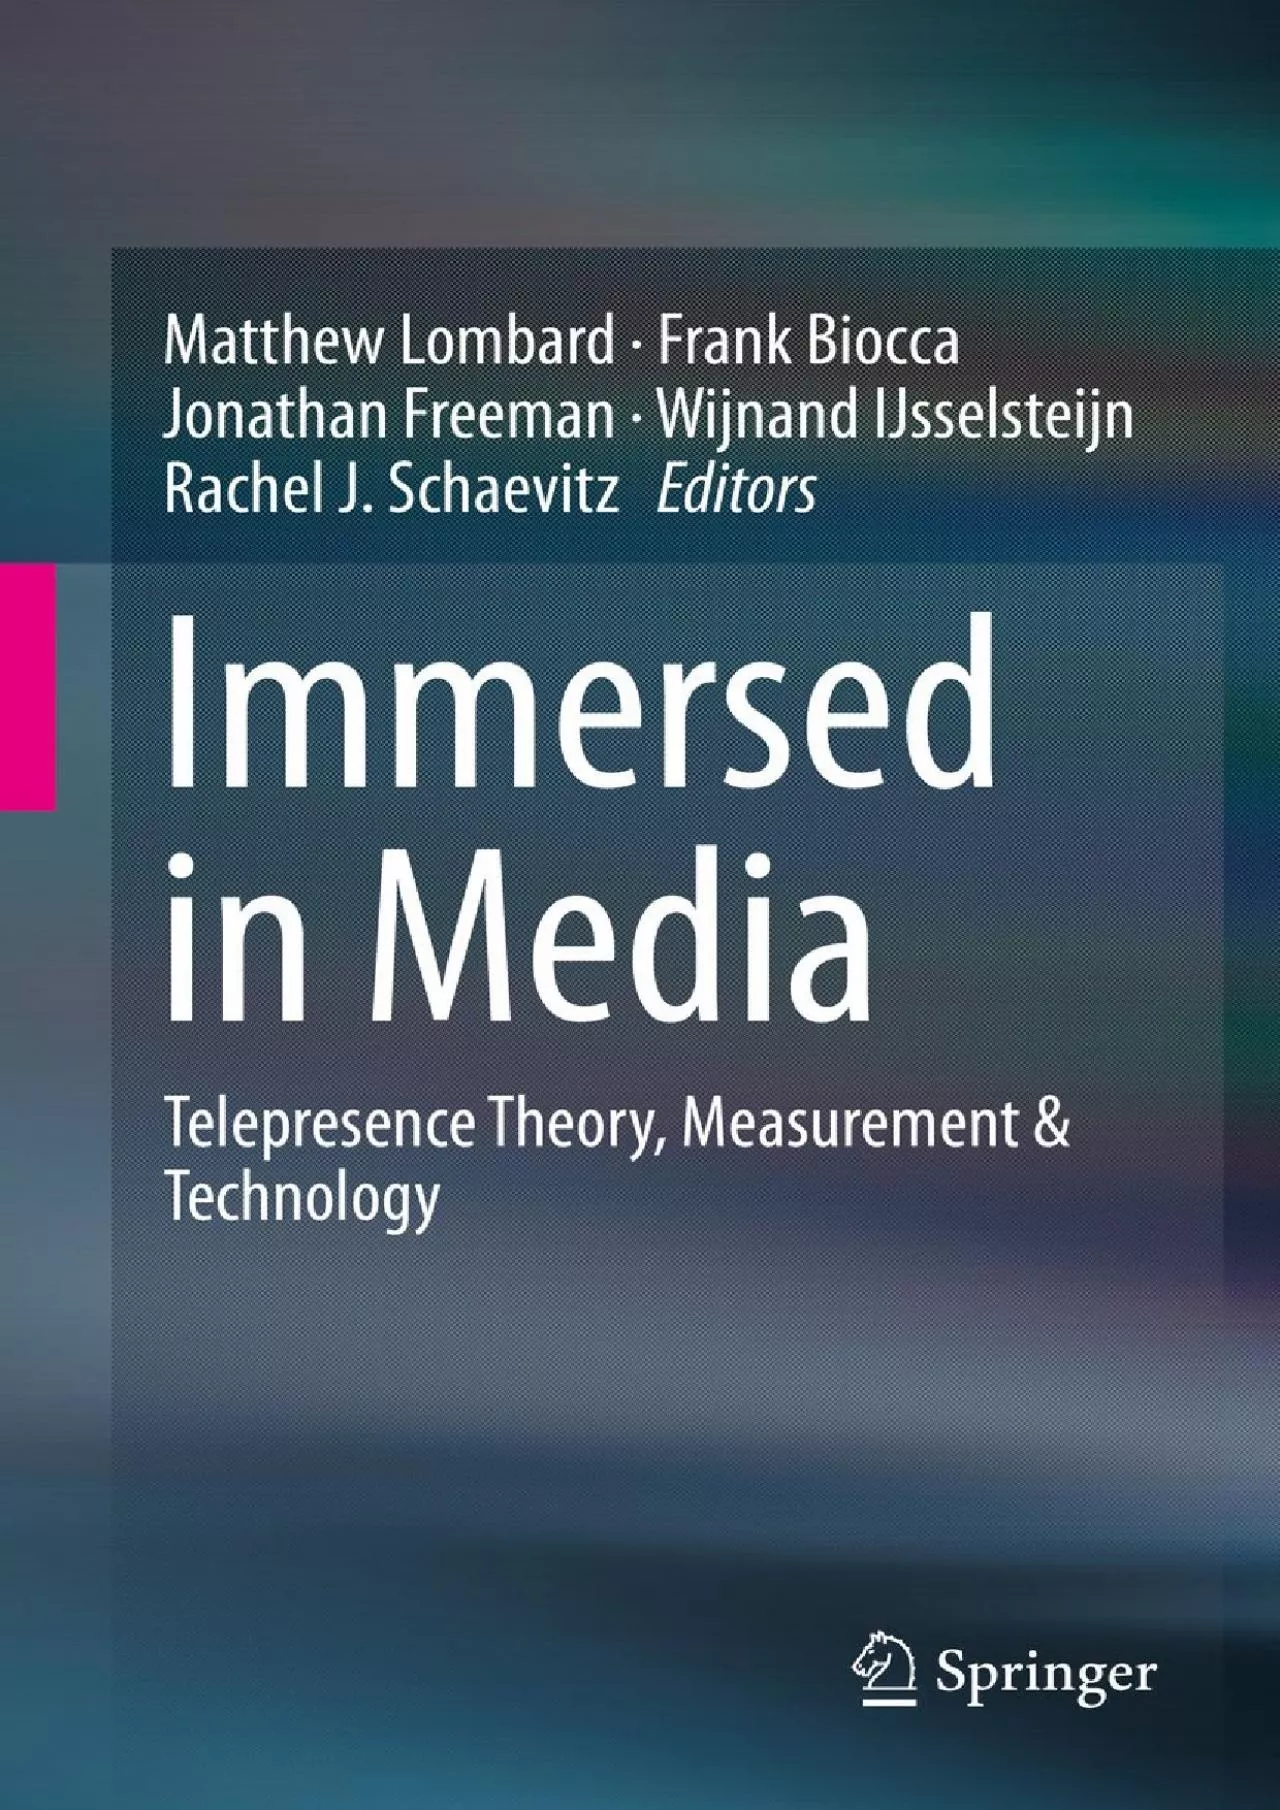 (DOWNLOAD)-Immersed in Media Telepresence Theory Measurement & Technology